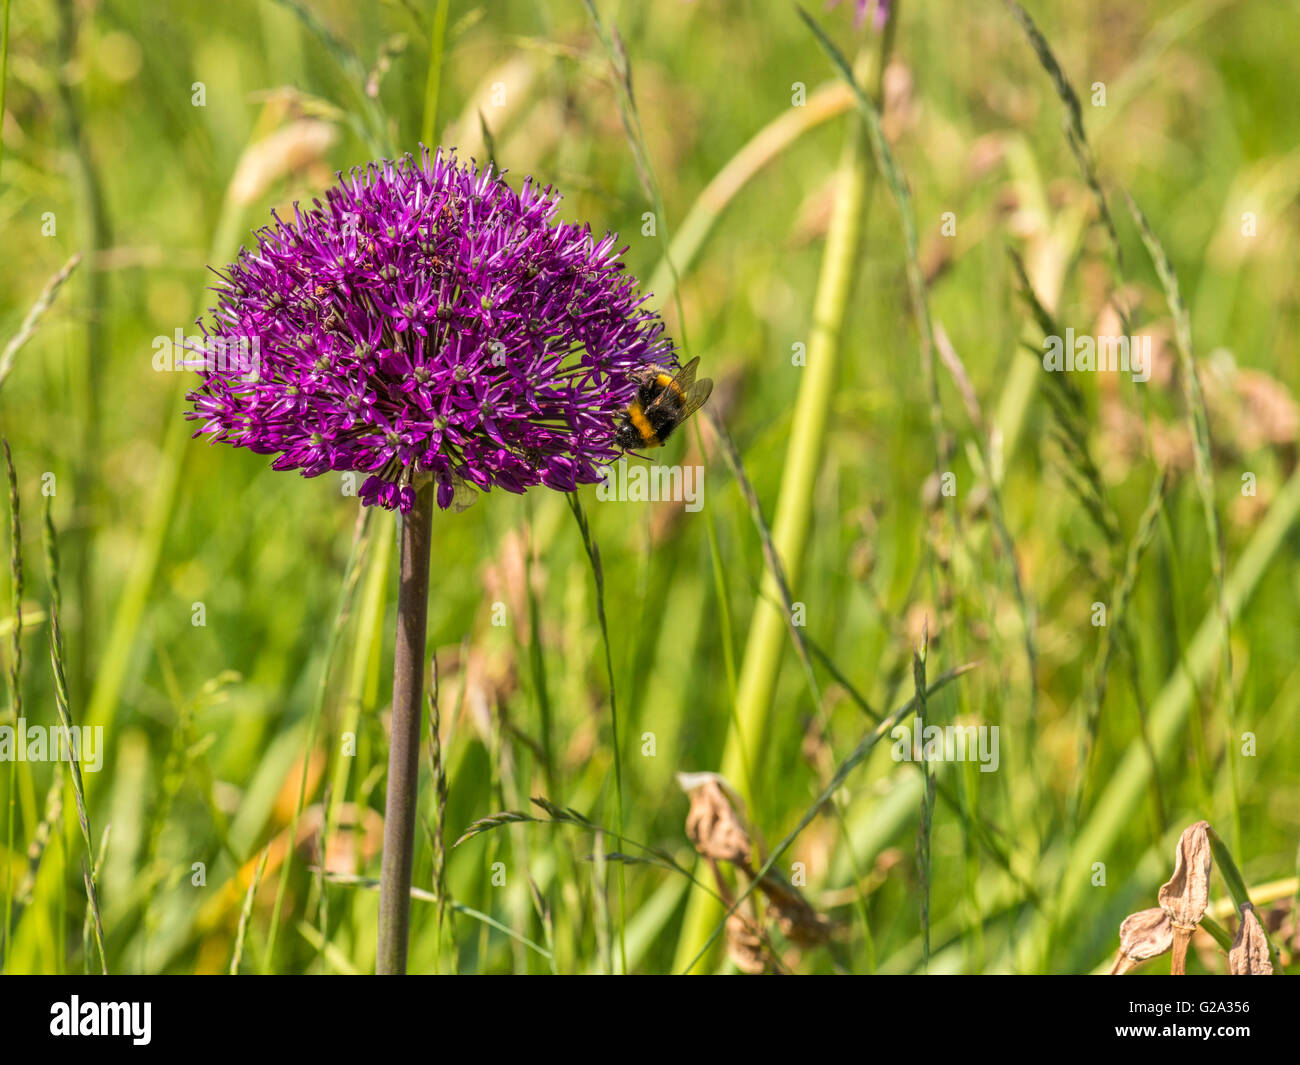 Spring Pollinator, Bumblebee (Bombus) collecting nectar from the vivid rosy purple crowded spherical umbels of the Allium plant. Stock Photo